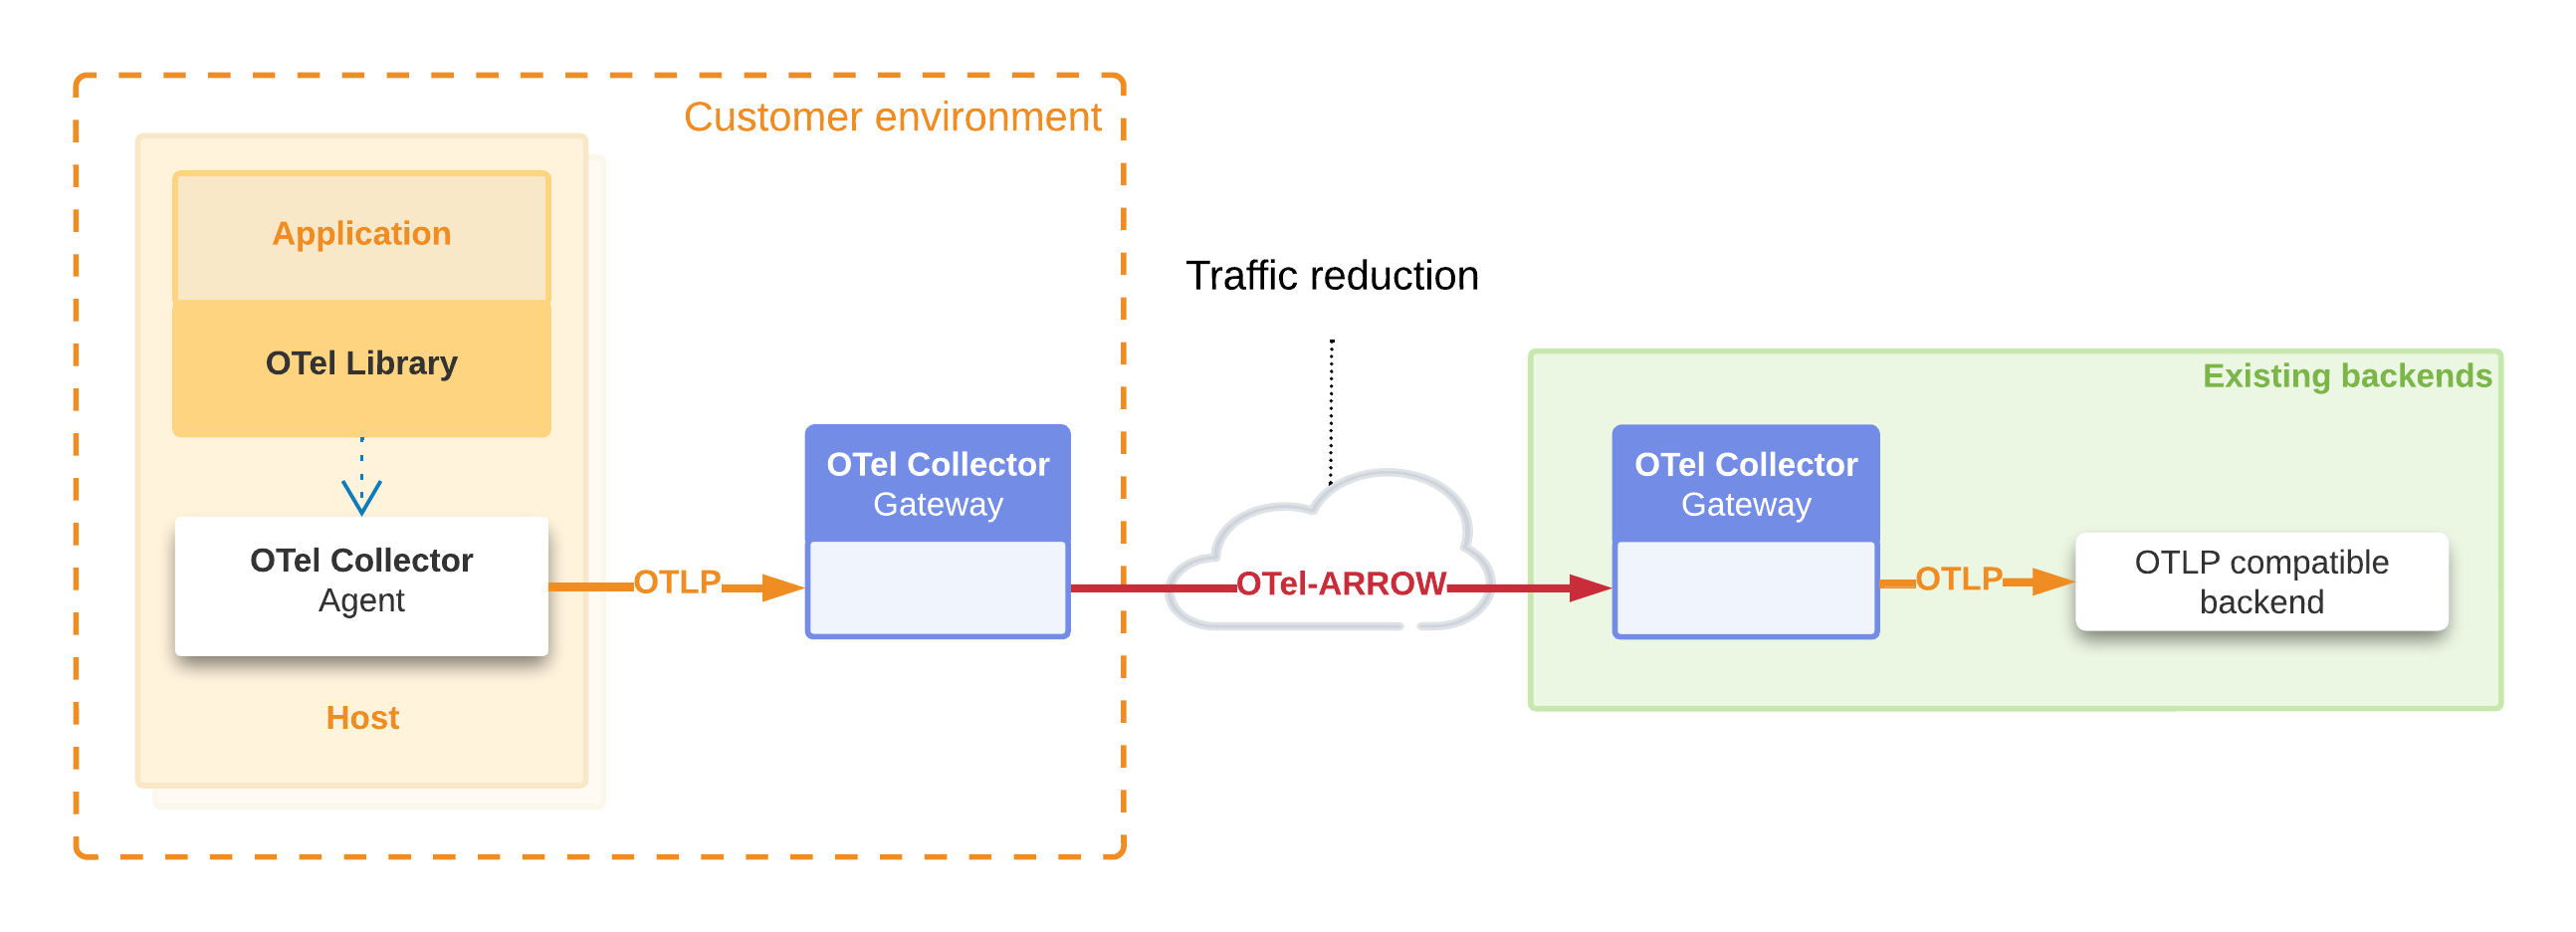 Traffic reduction use case